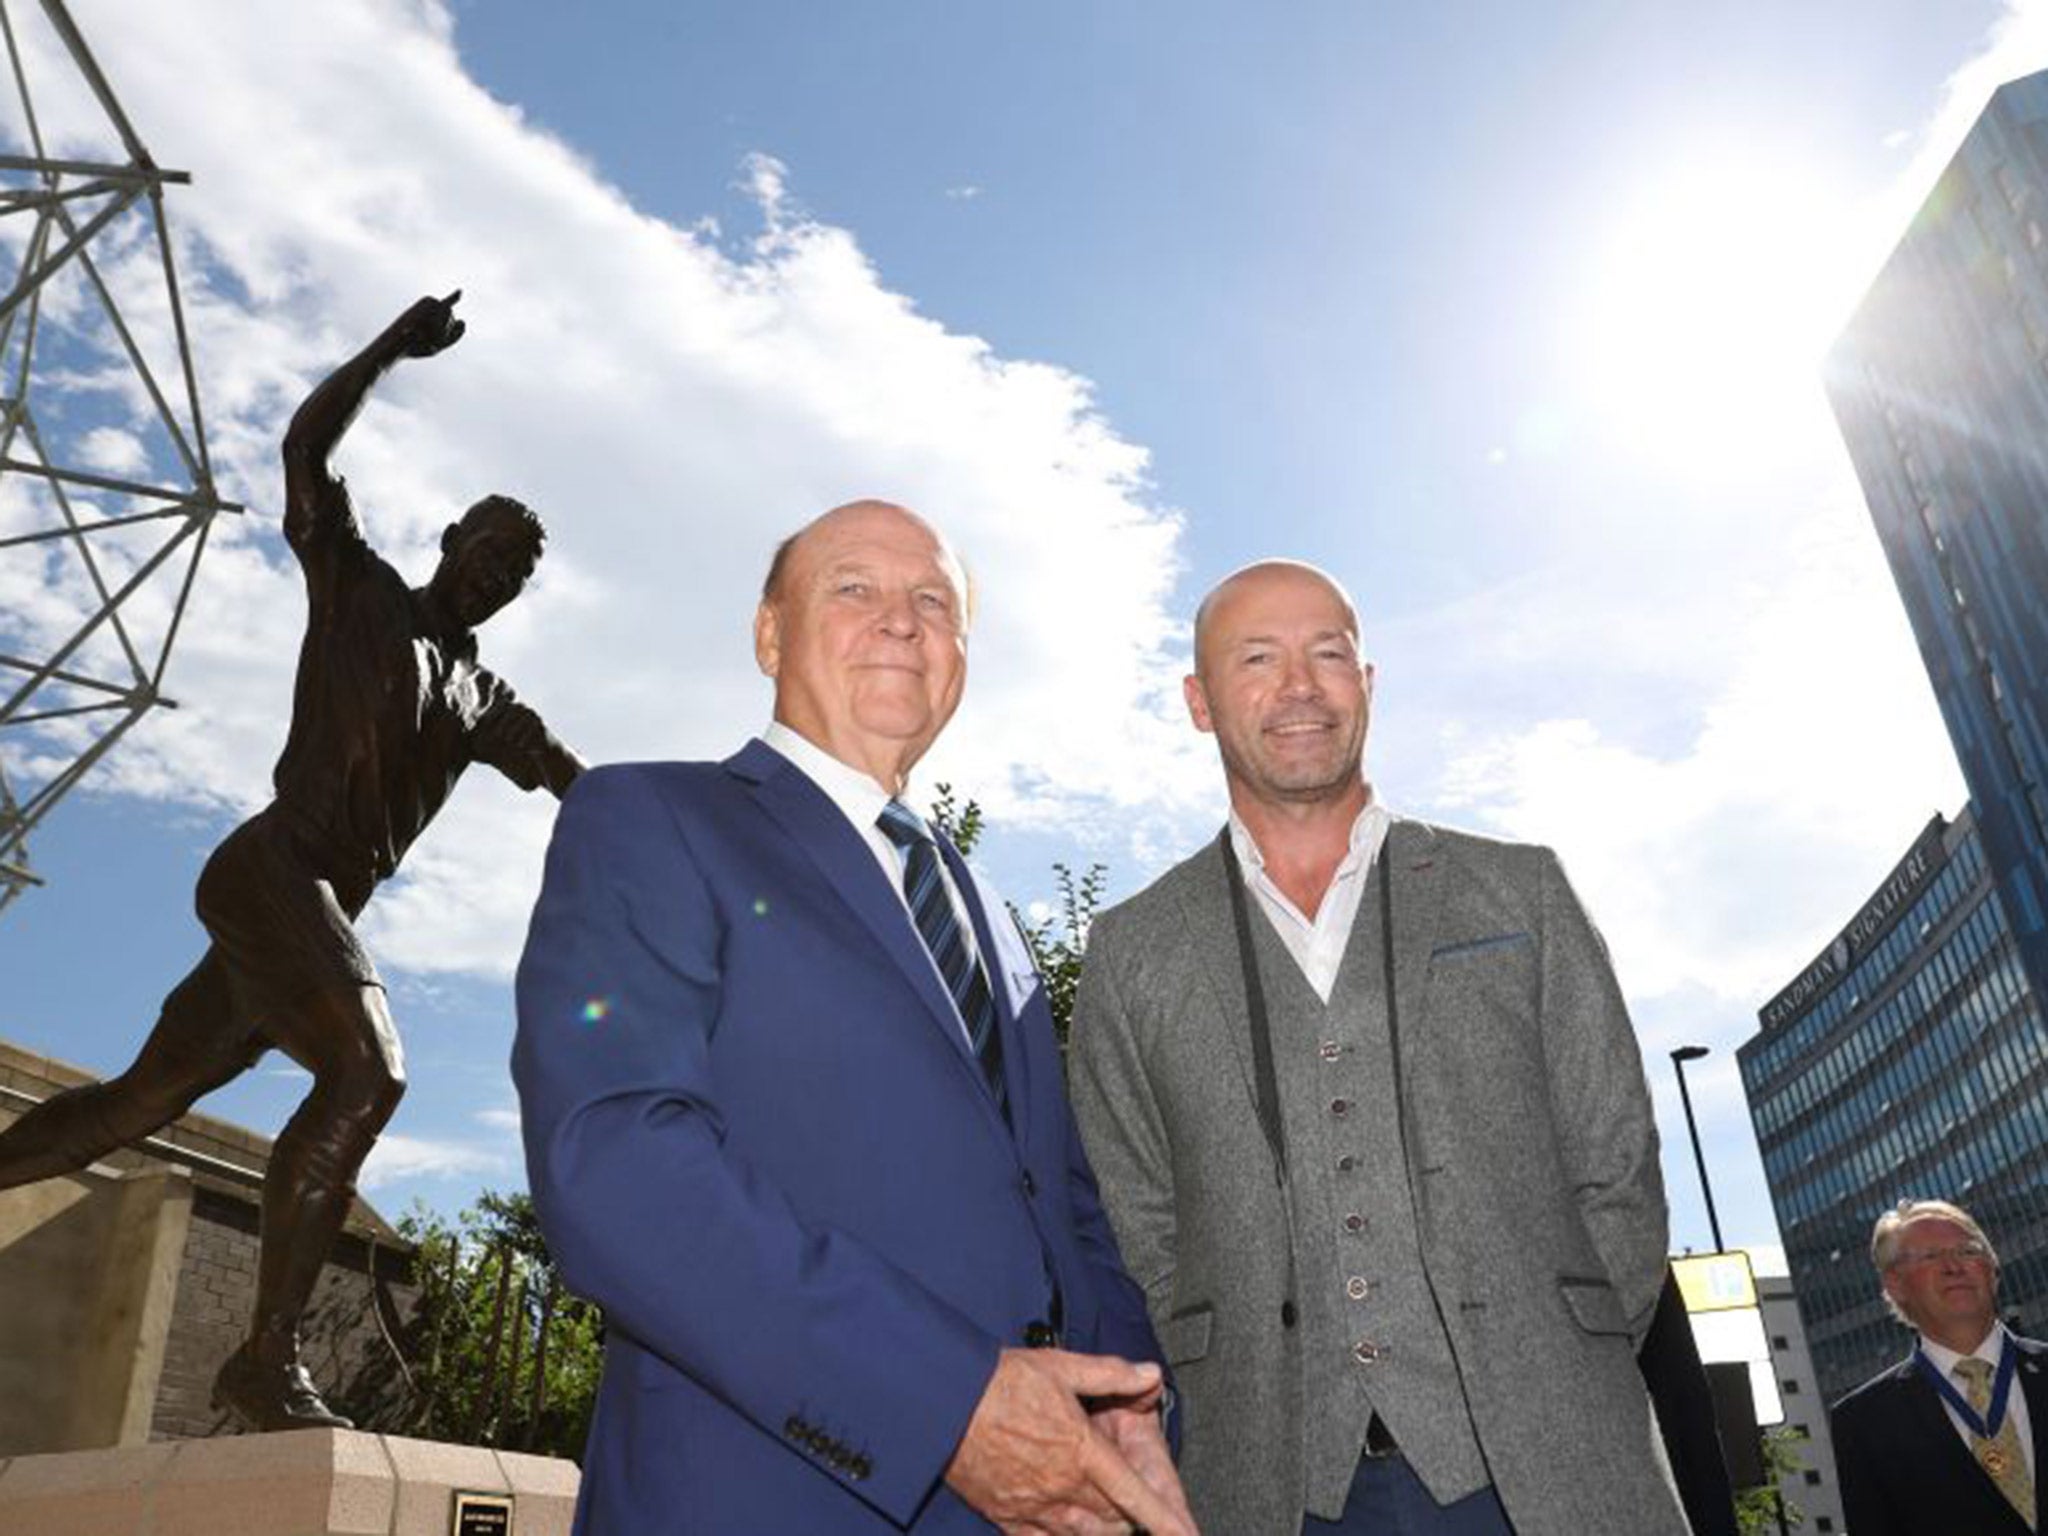 Alan Shearer stands alongside Freddy Shepherd and the new bronze statue of him outside St James' Park